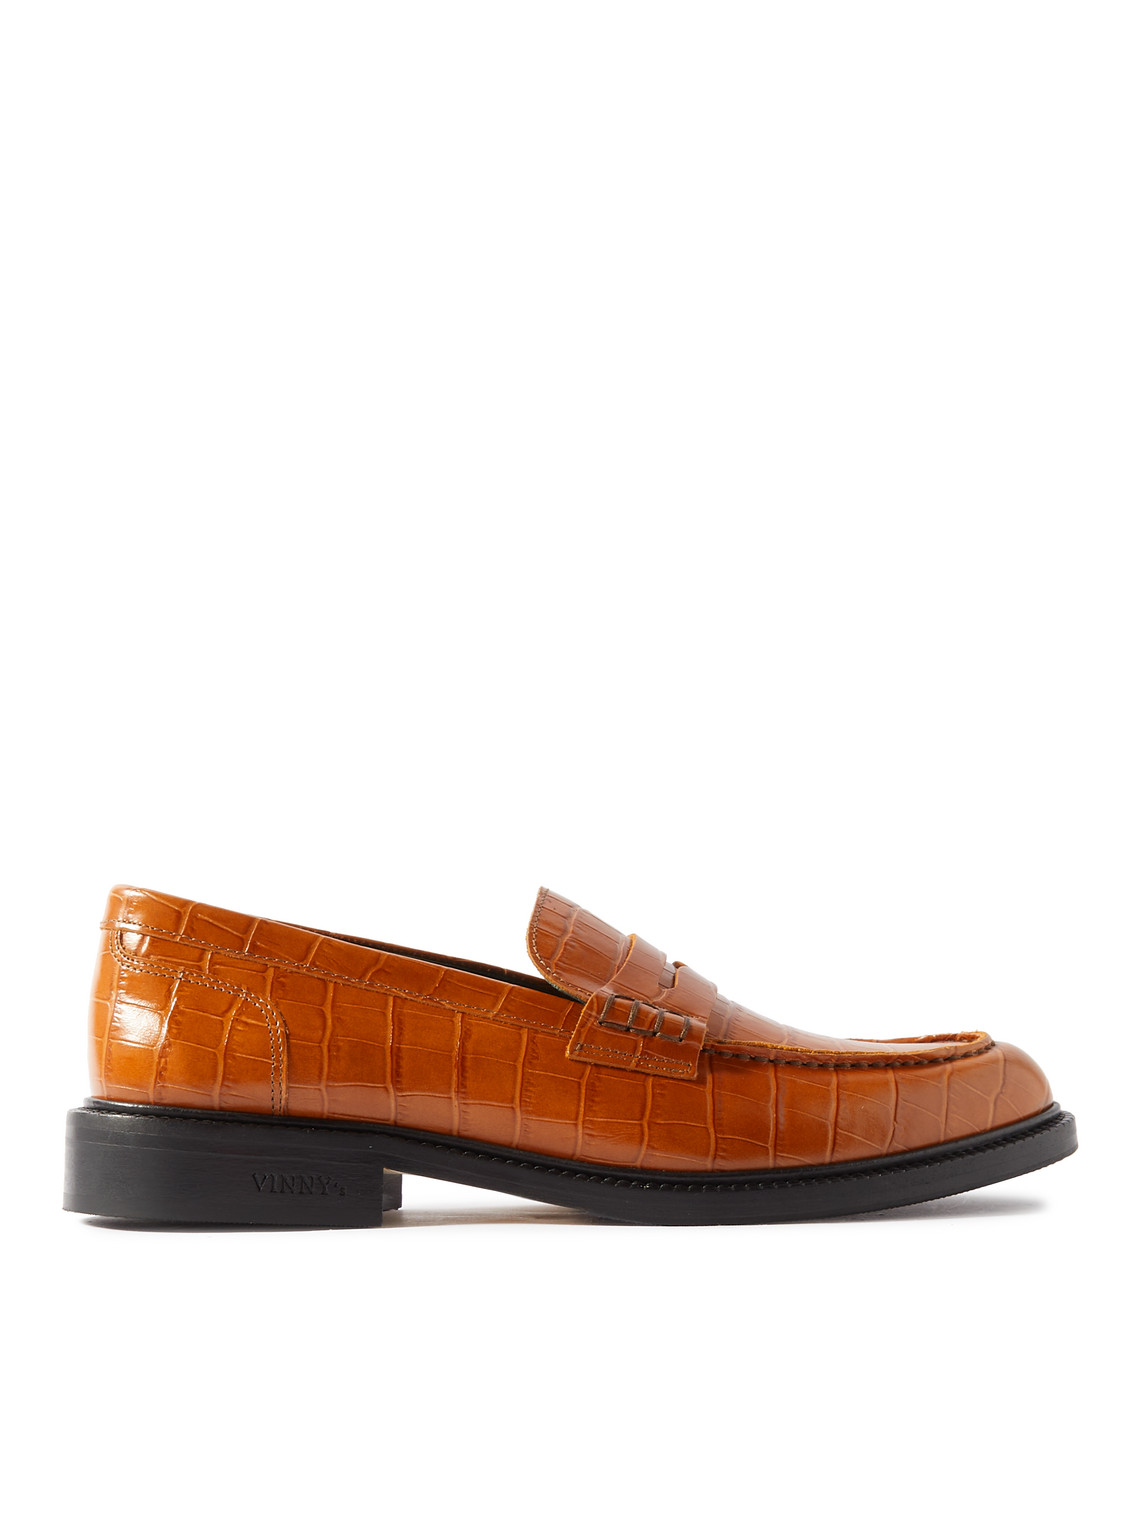 VINNY'S TOWNEE CROC-EFFECT LEATHER PENNY LOAFERS